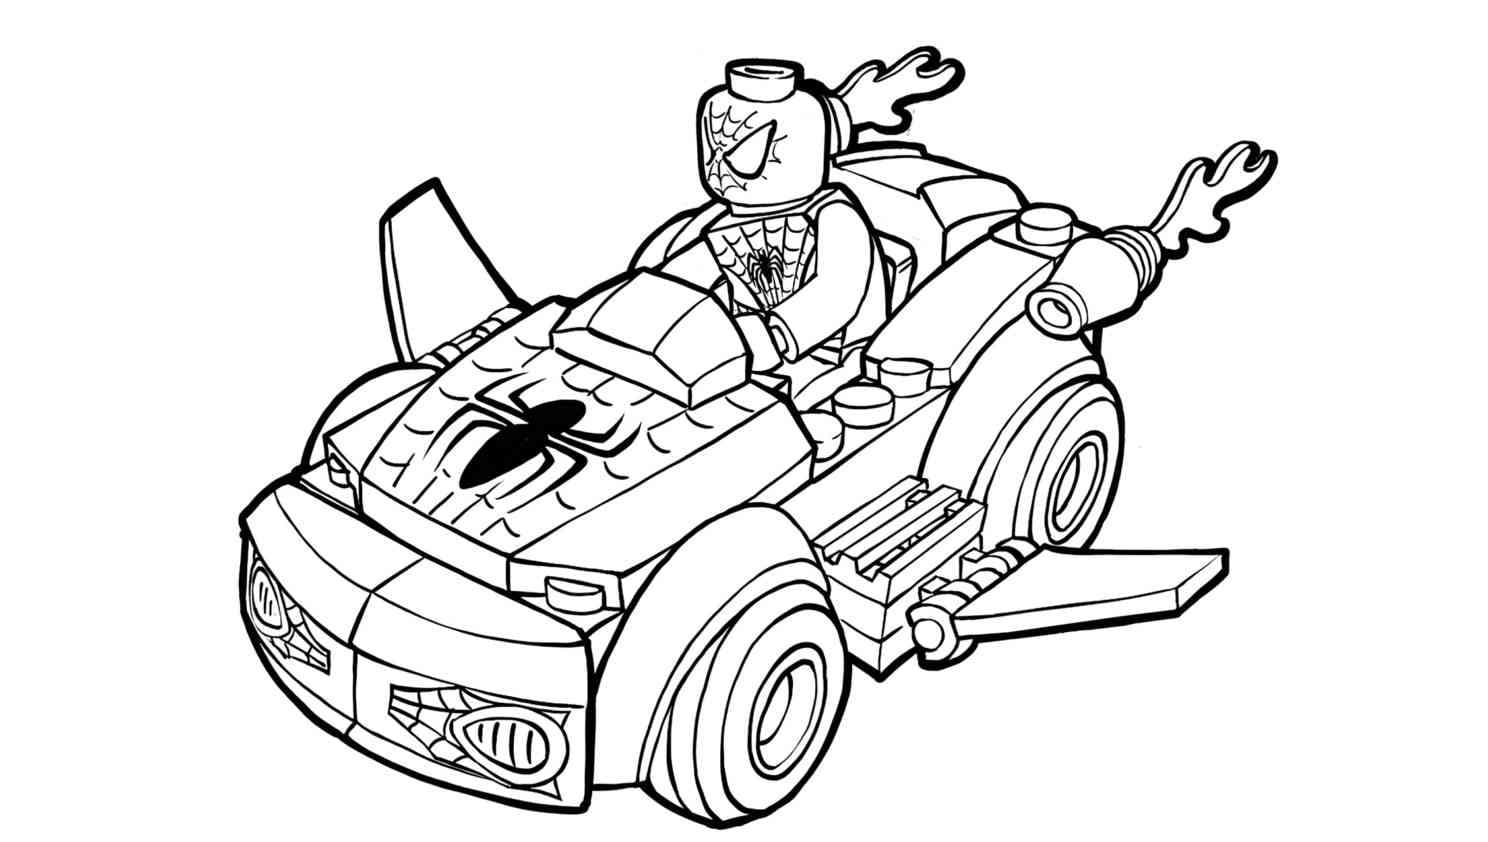 Lego Coloring Pages. Download or print for free, 100 images